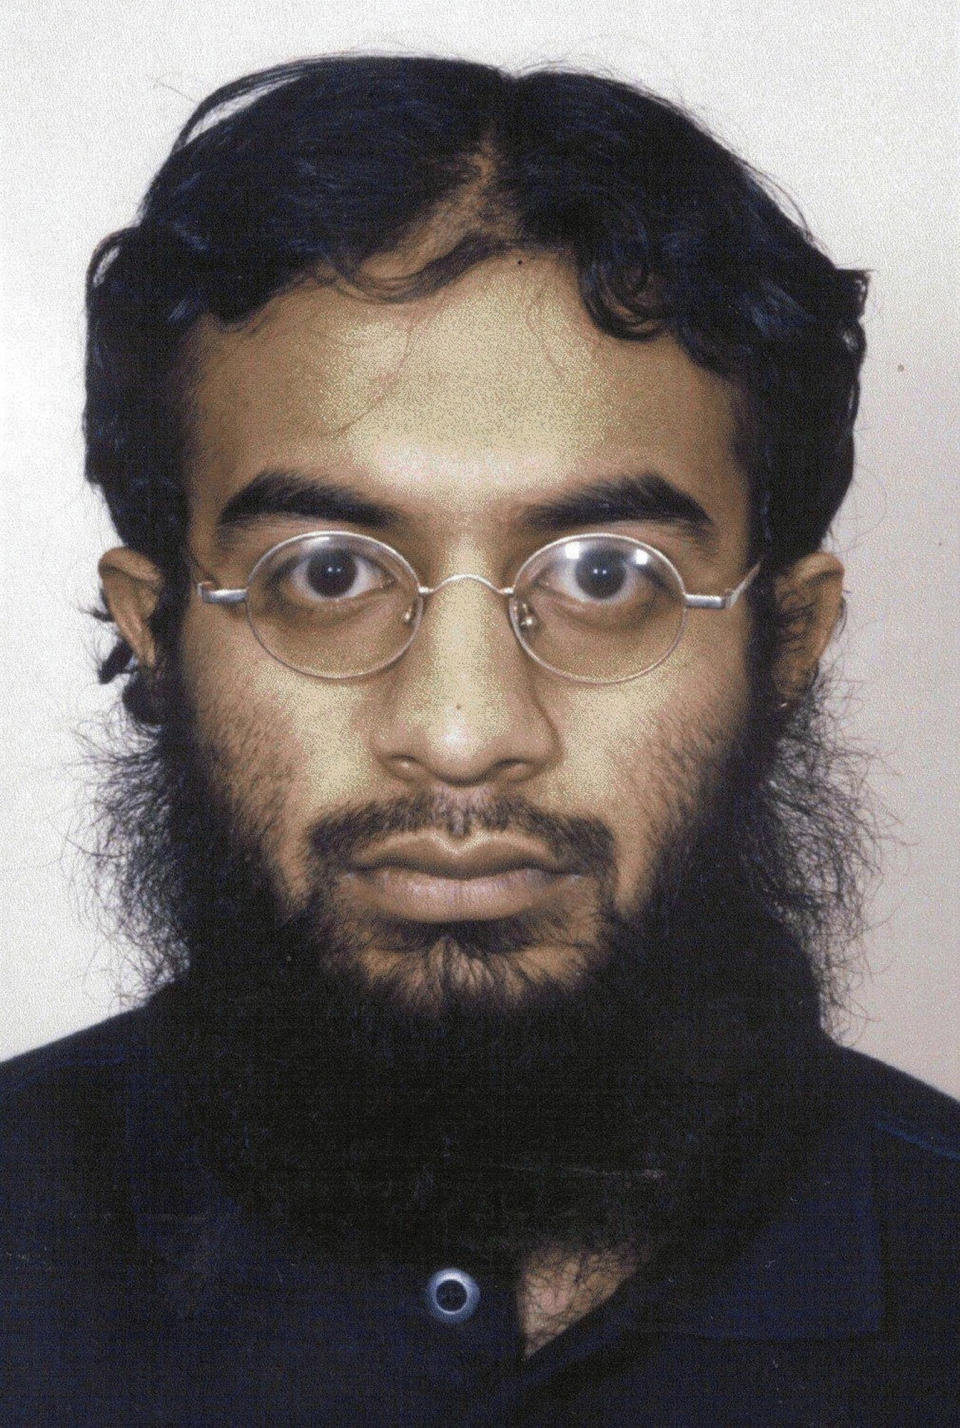 FILE - This undated file photo provided by the Metropolitan Police in London shows Saajid Badat, sentenced in 2005 after admitting he conspired to blow up a U.S.-bound plane in 2001 with explosives hidden in a shoe. On Monday, March 17, 2014, a federal judge in New Haven, Conn., granted the request by prosecutors to have a witness testify by video from Britain in the July sentencing of two British citizens, Babar Ahmad and Syed Talha Ahsan, who pleaded guilty in Connecticut to supporting terrorists through websites. The witness, not named in court papers but fits the description of Badat, is expected to testify that Ahmad sent him to Afghanistan to train for violent jihad and that he moved on from Ahmad and was trained by al-Qaida members for the failed shoe bomb plot to bring down an airplane. (AP Photo/Metropolitan Police, File)